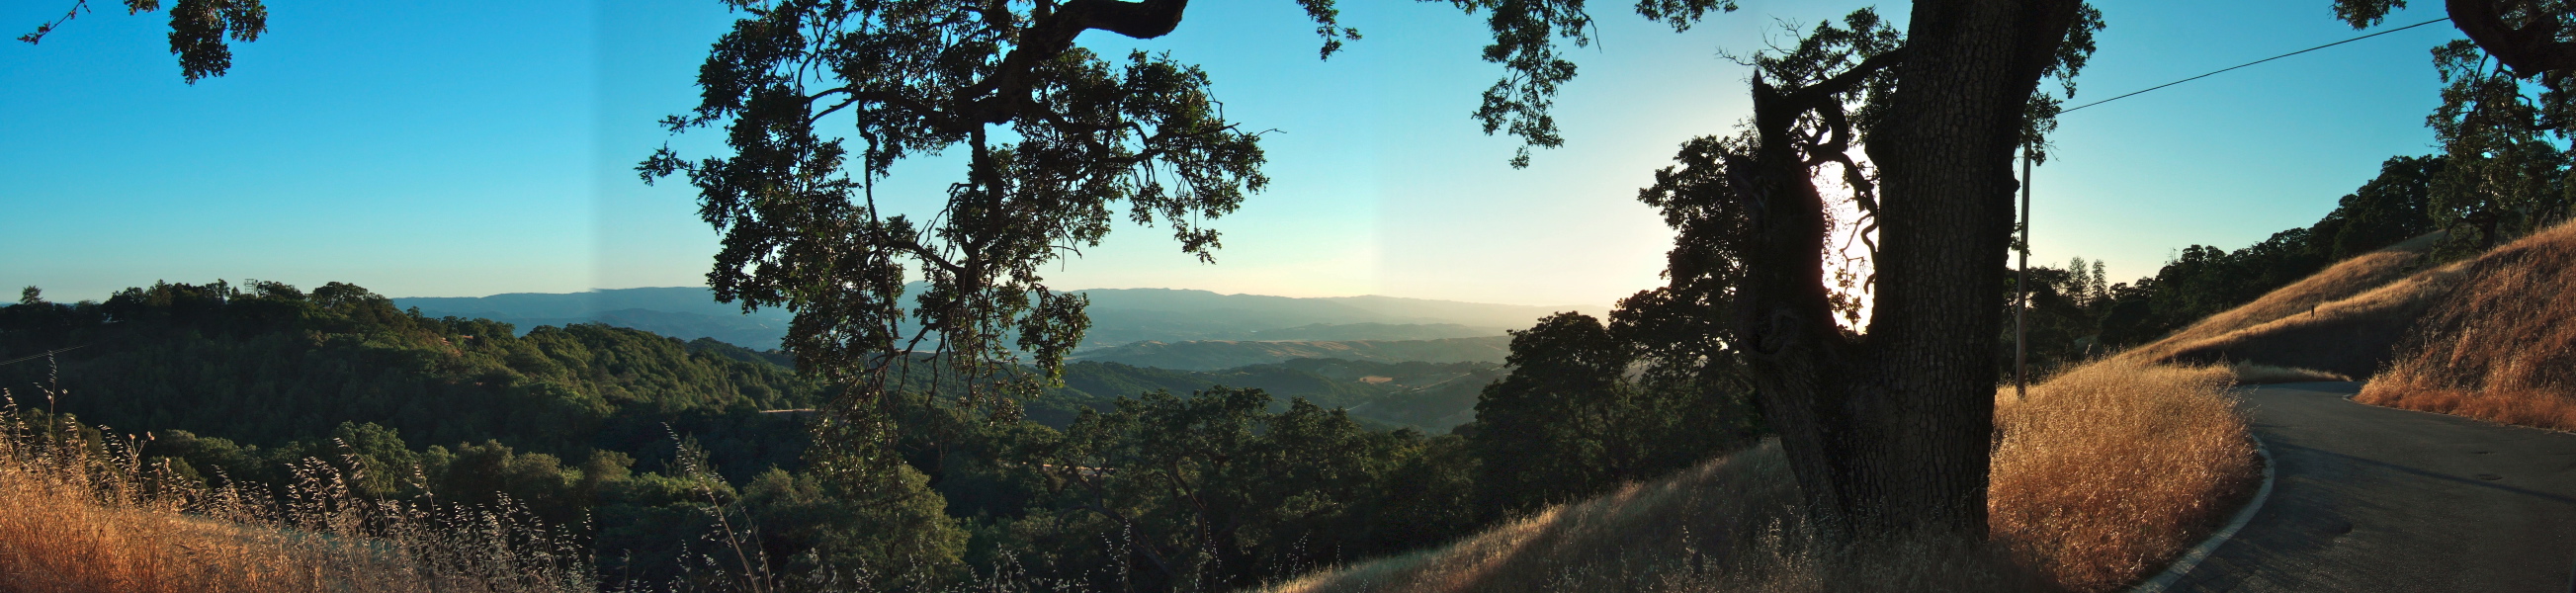 Sunset from Henry Coe State Park